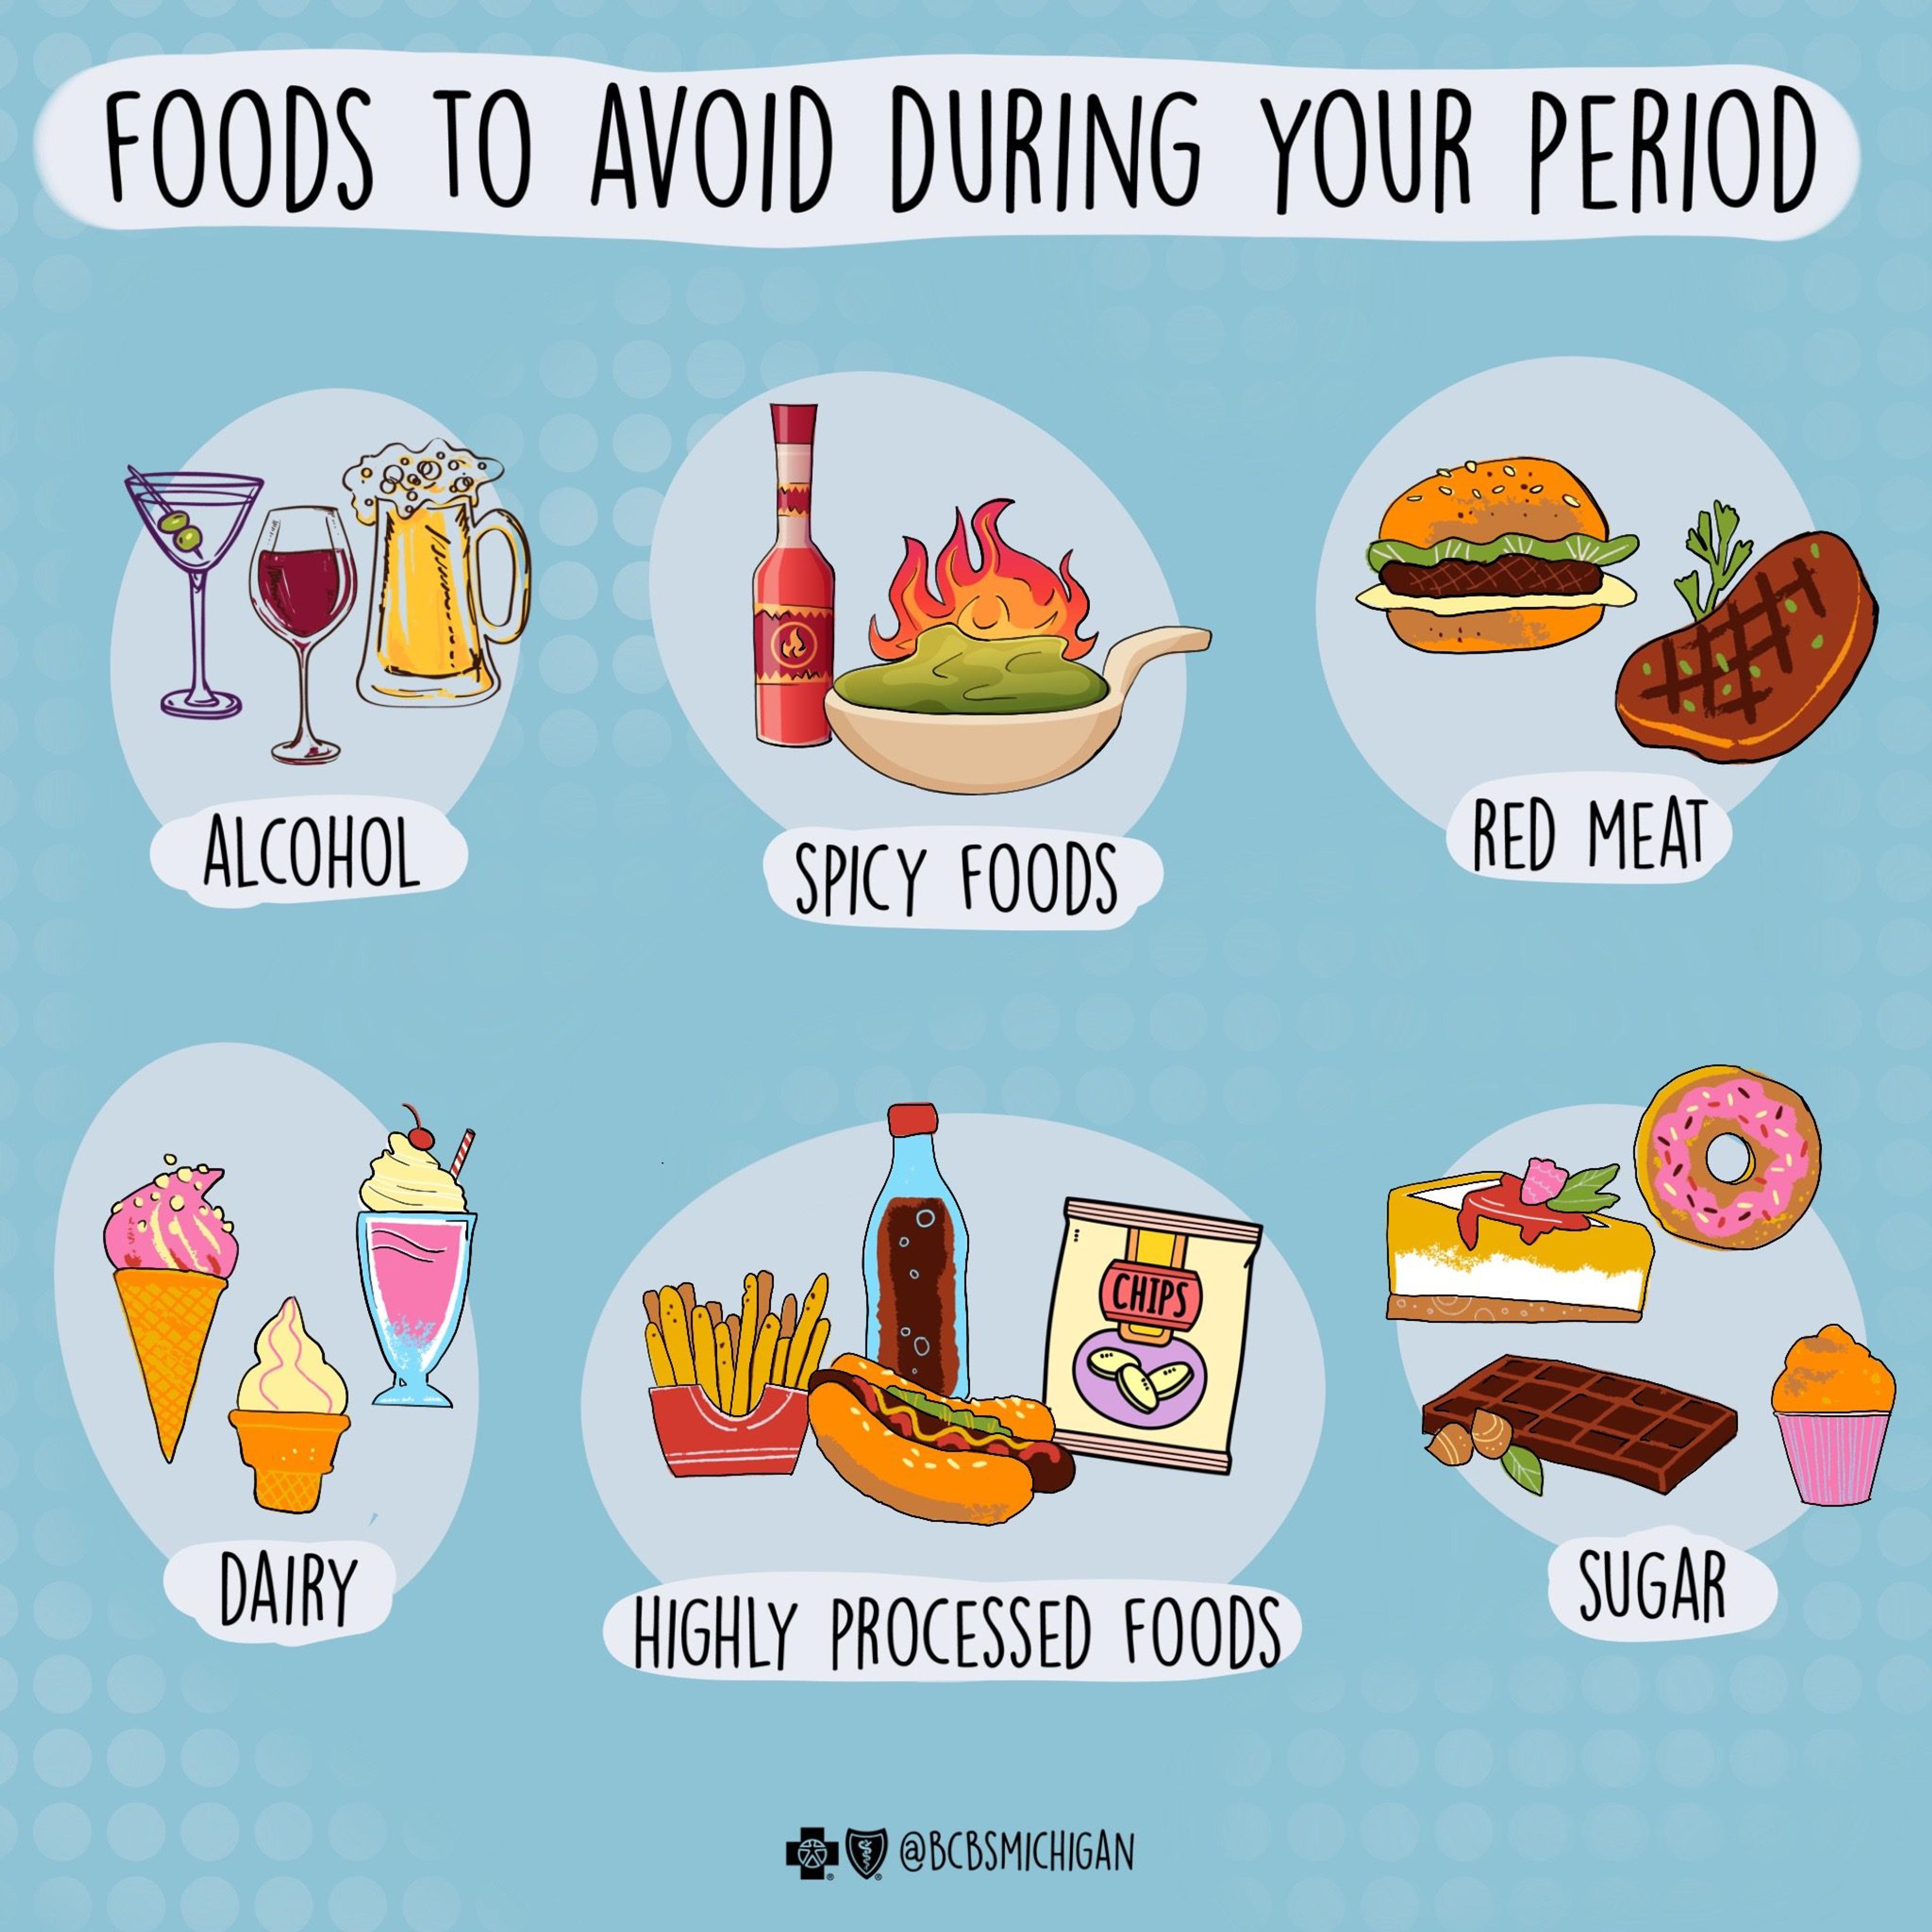 Graphic image of foods to avoid during your period